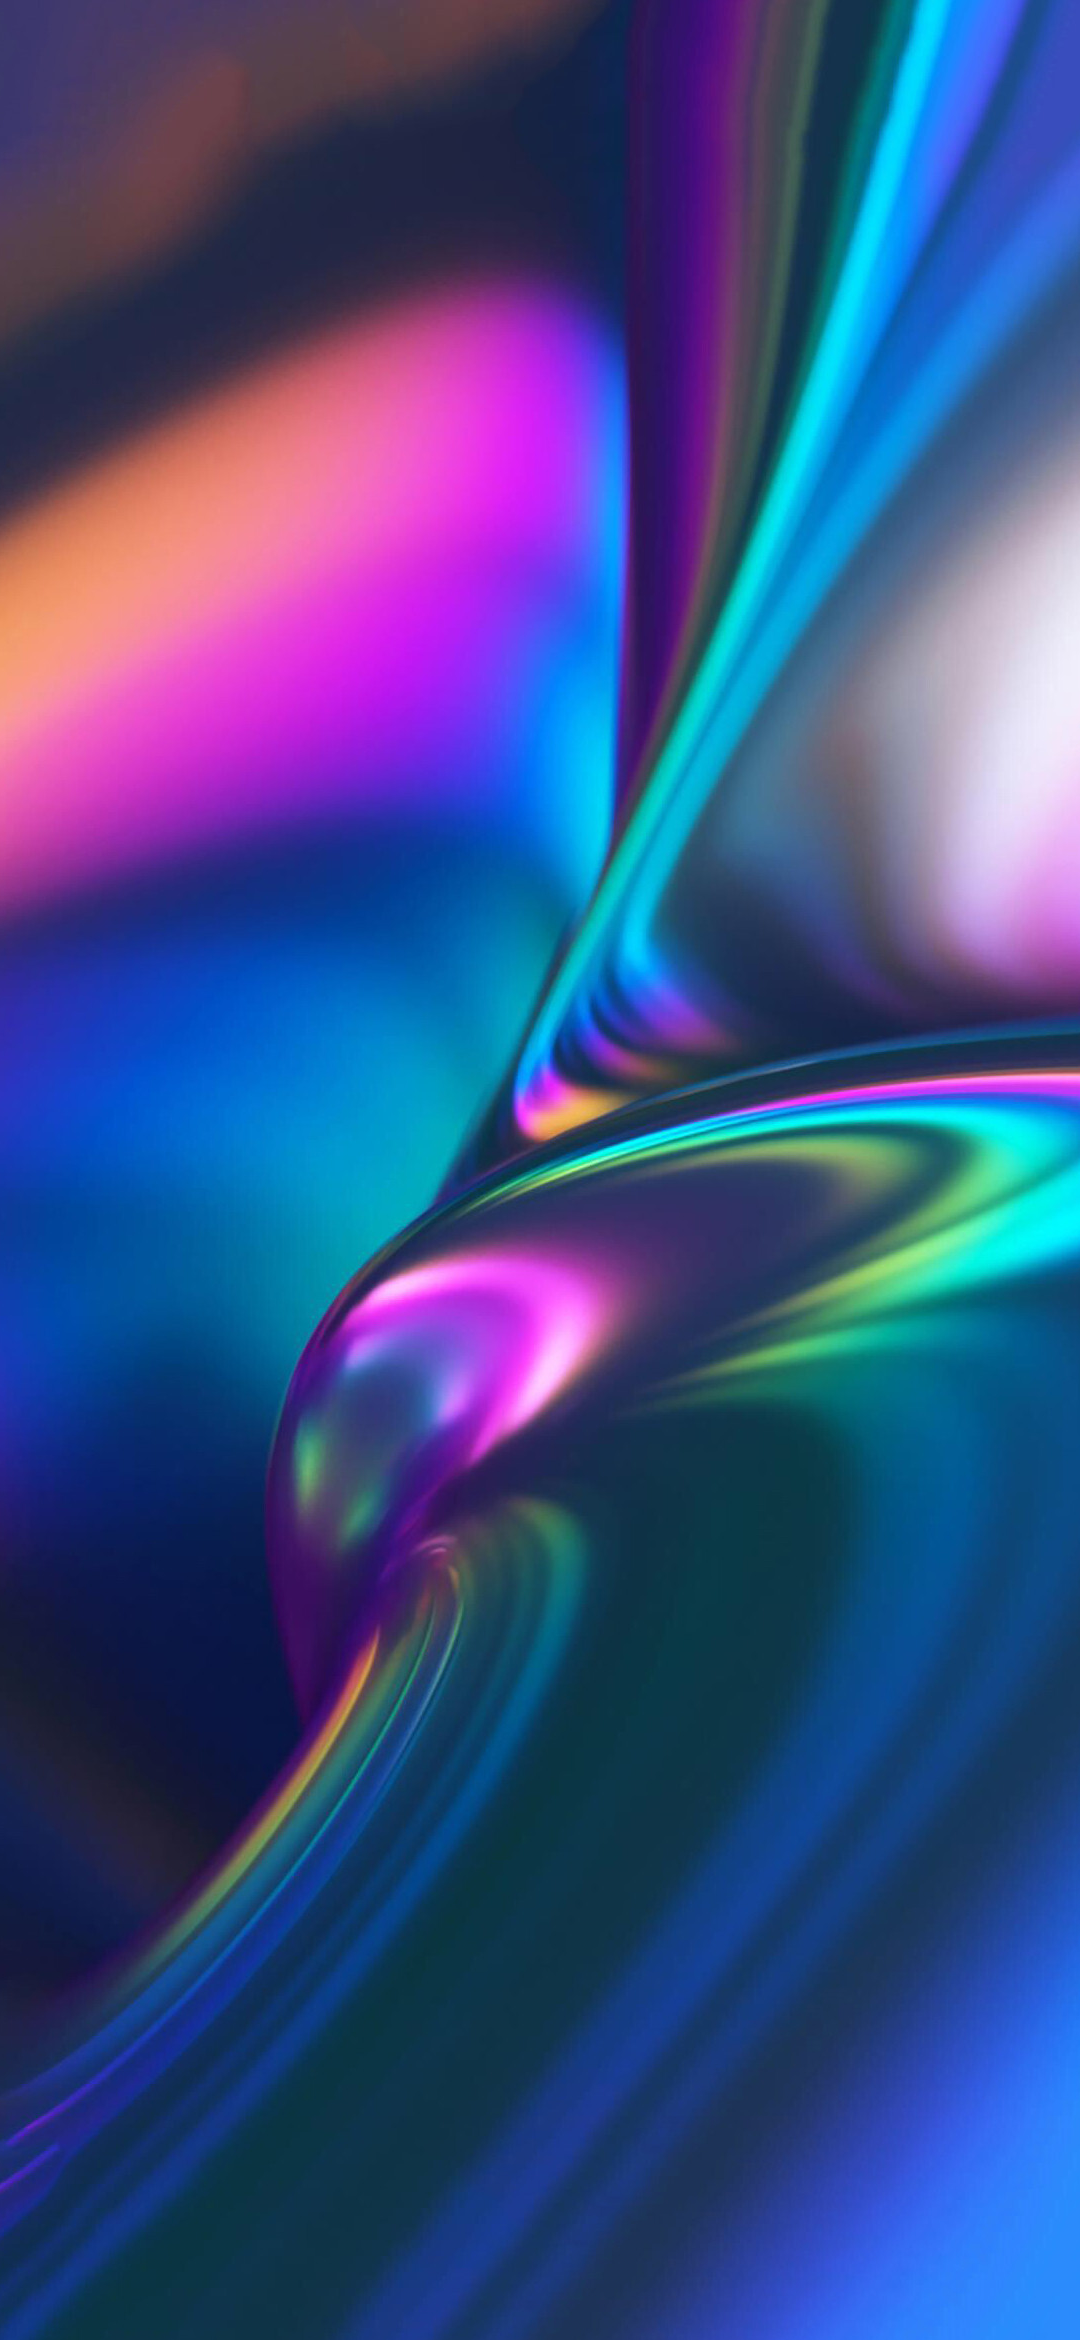 Iphone hd colorful wallpapers